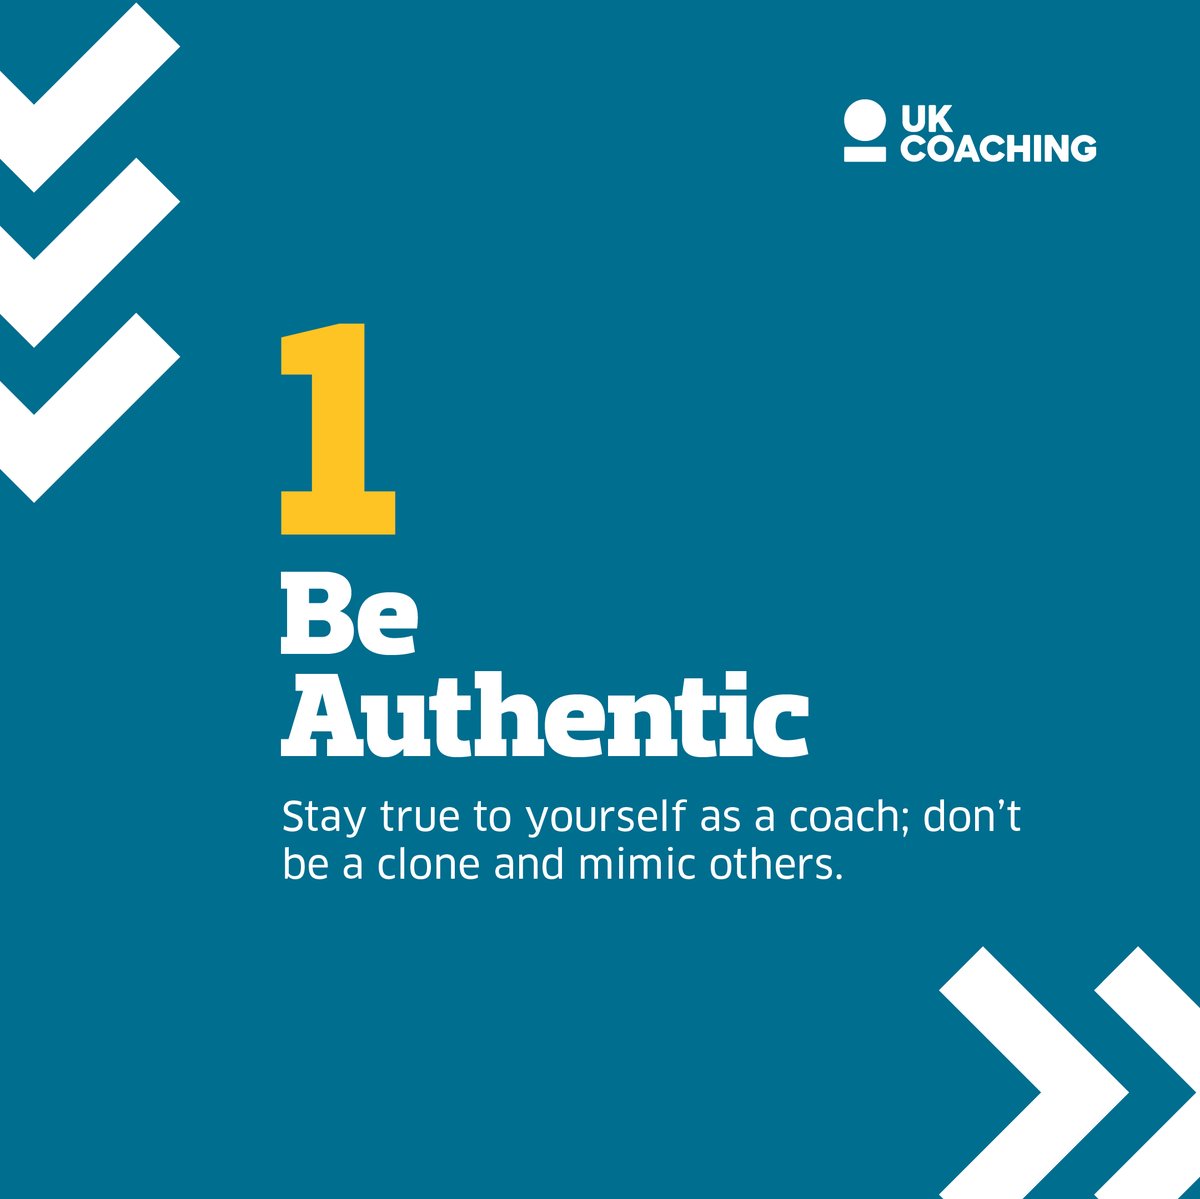 1️⃣ 'Be Authentic' – @horsesheed reminds us of the importance of originality and embracing your coaching identity! (2/8)